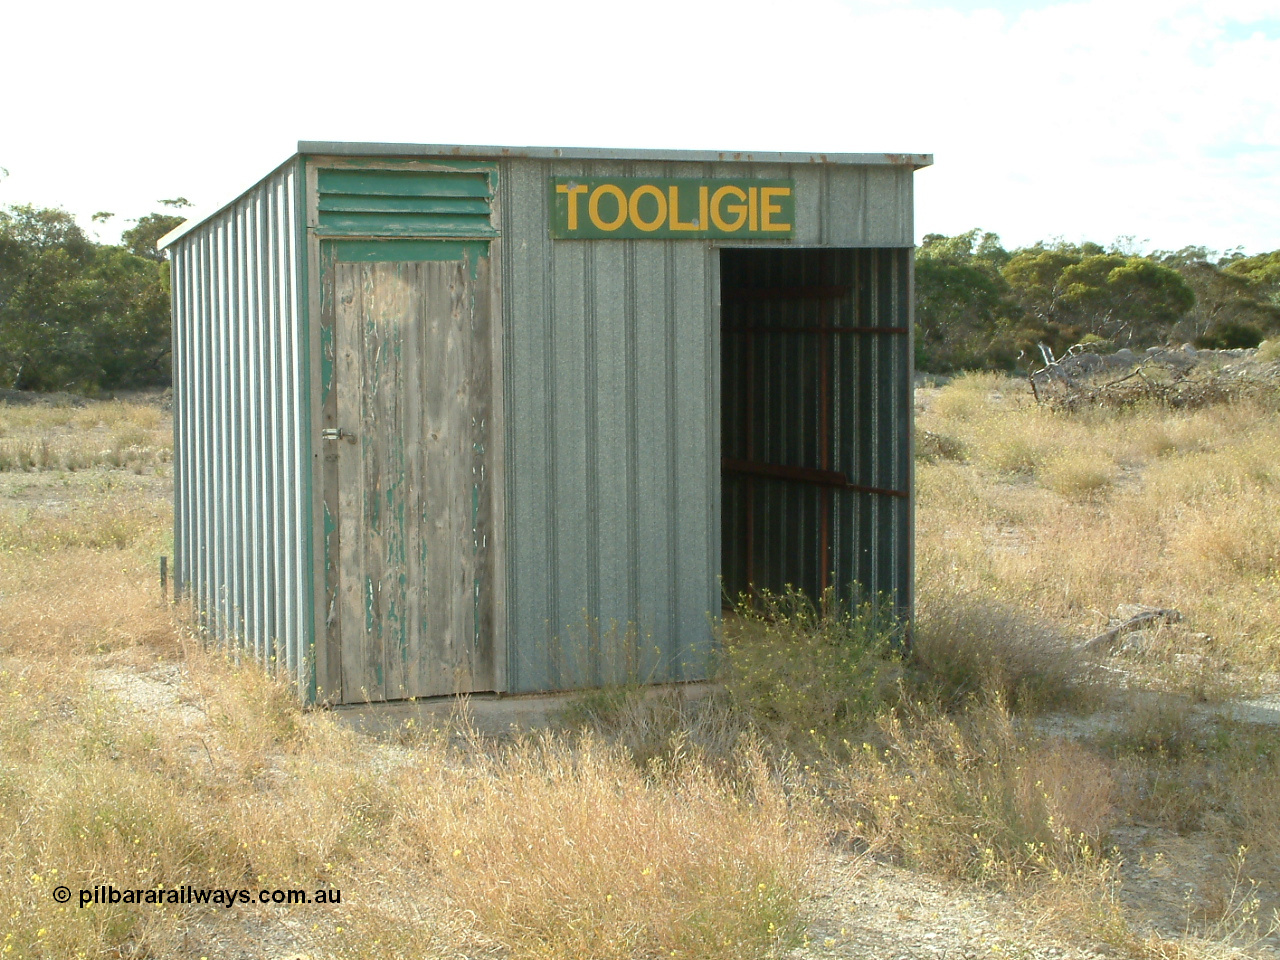 030406 084217
Tooligie, station located at the 113.4 km, originally opened May 1913, train control cabin and waiting room - shelter with station name board, 6th April 2003.
